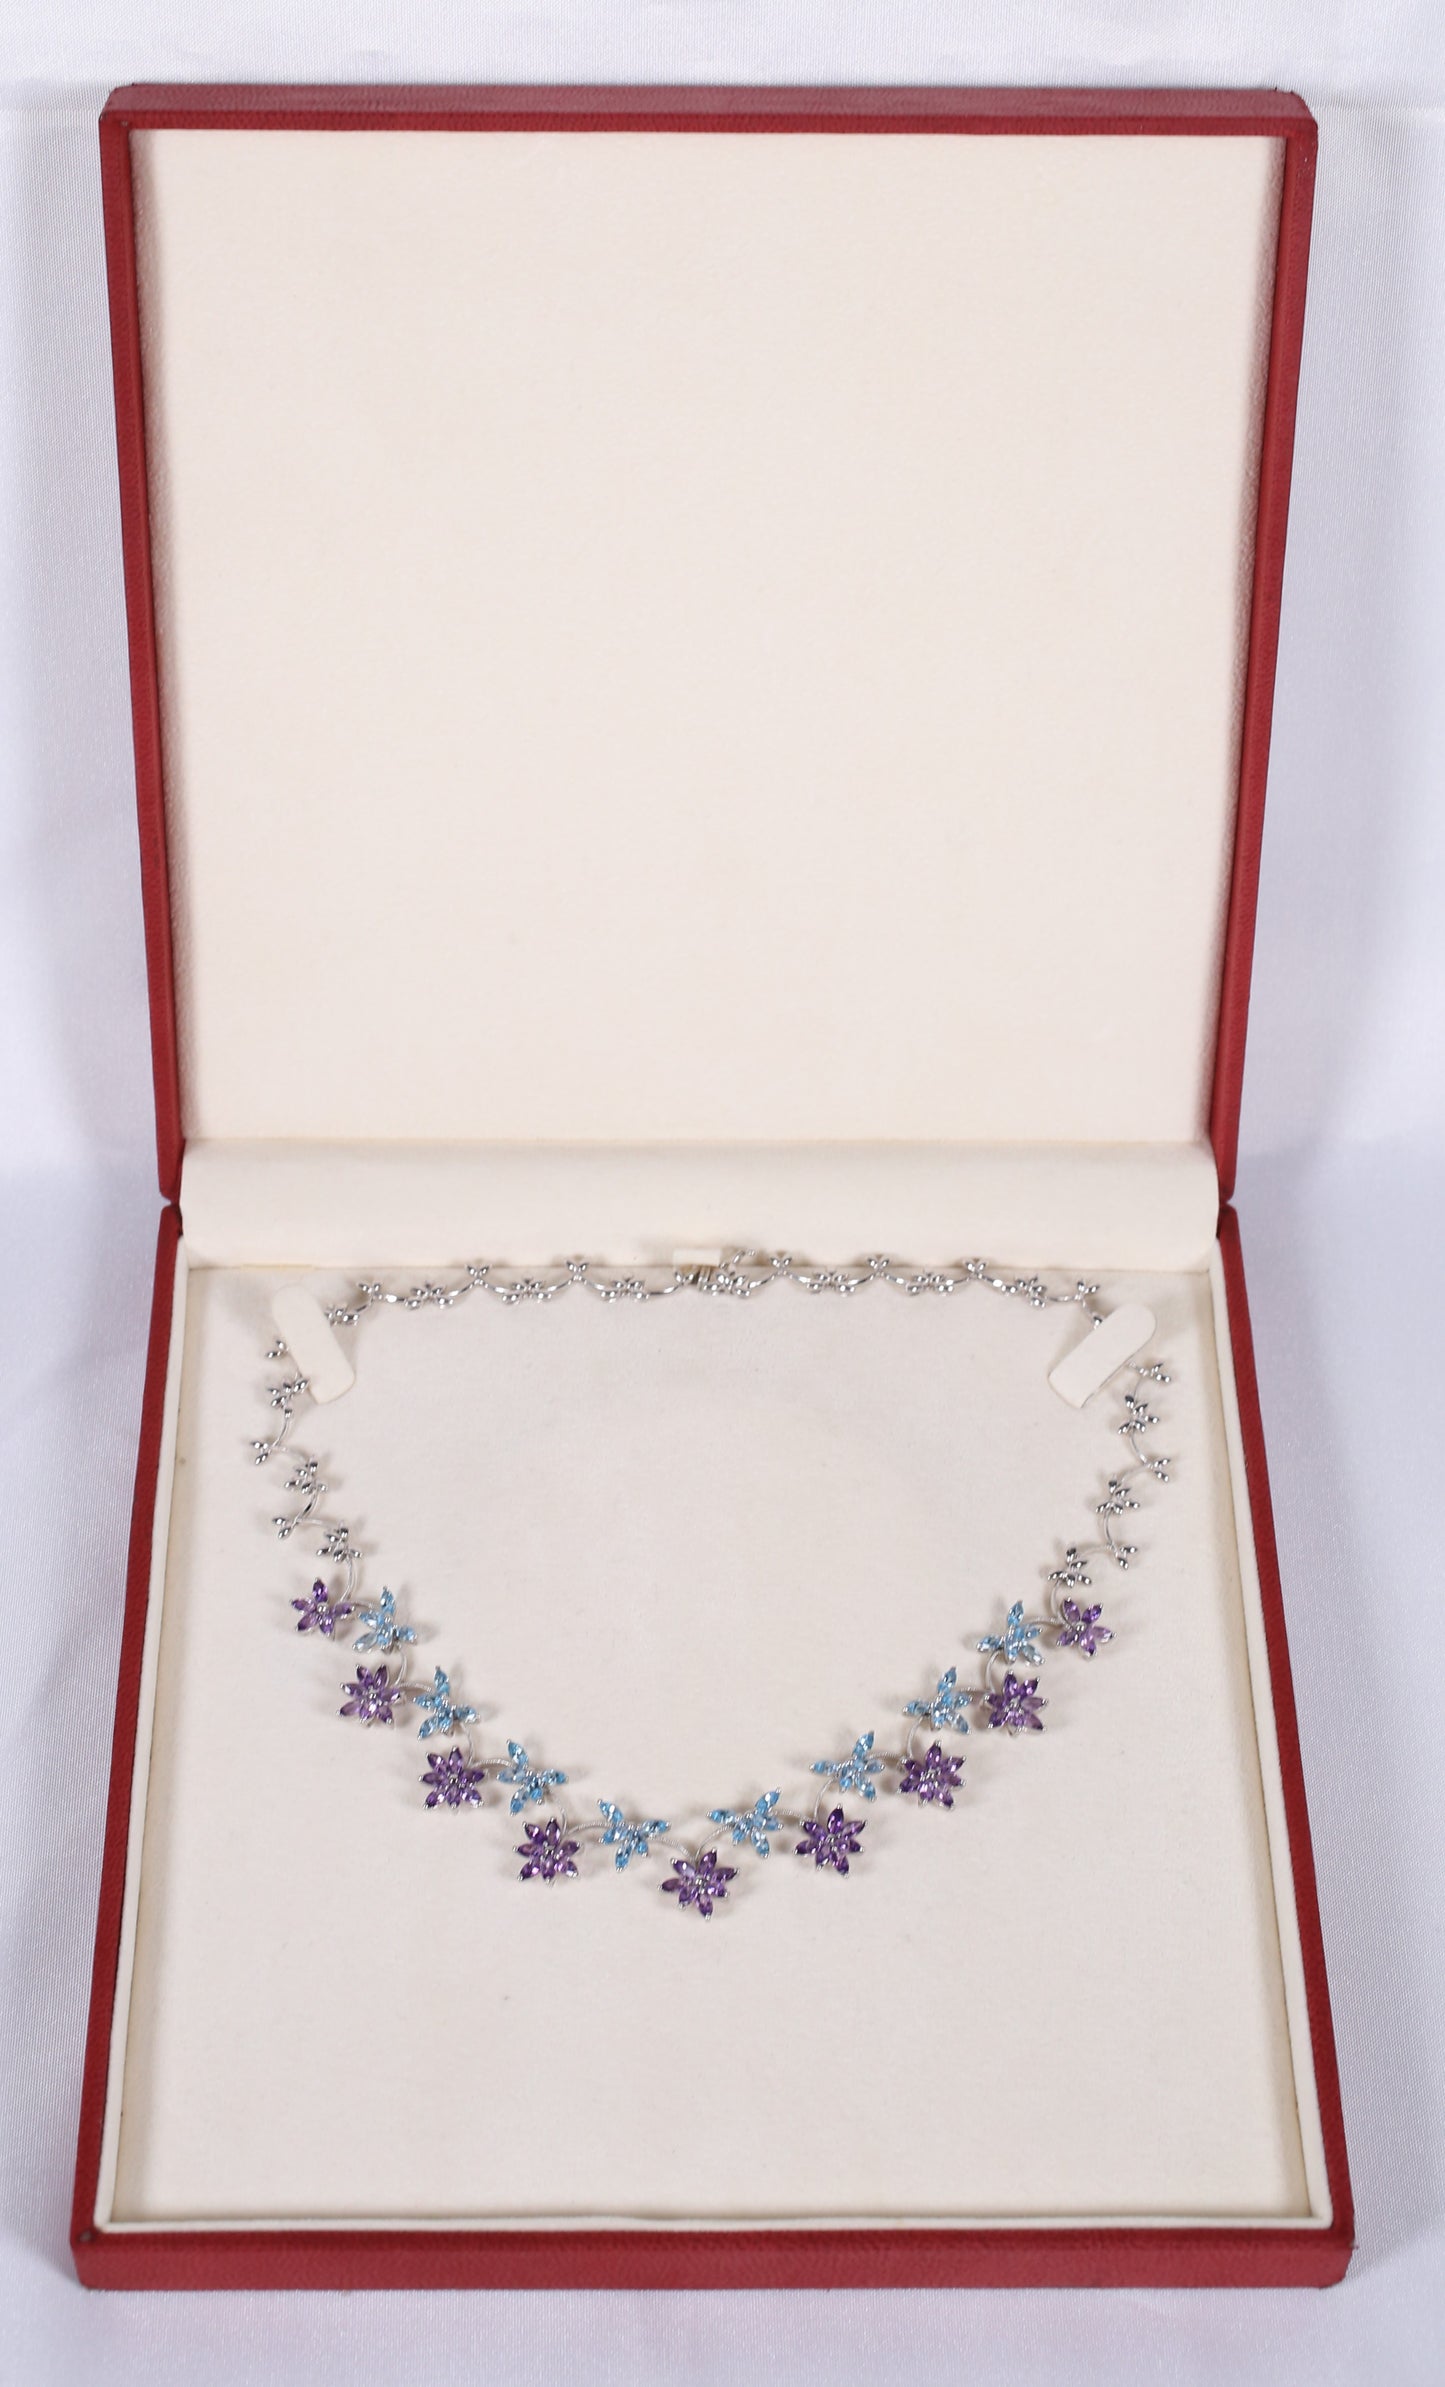 Gemtique 18k White Gold Amethyst & Topaz Floral Necklace, 16 inches - 37.3g